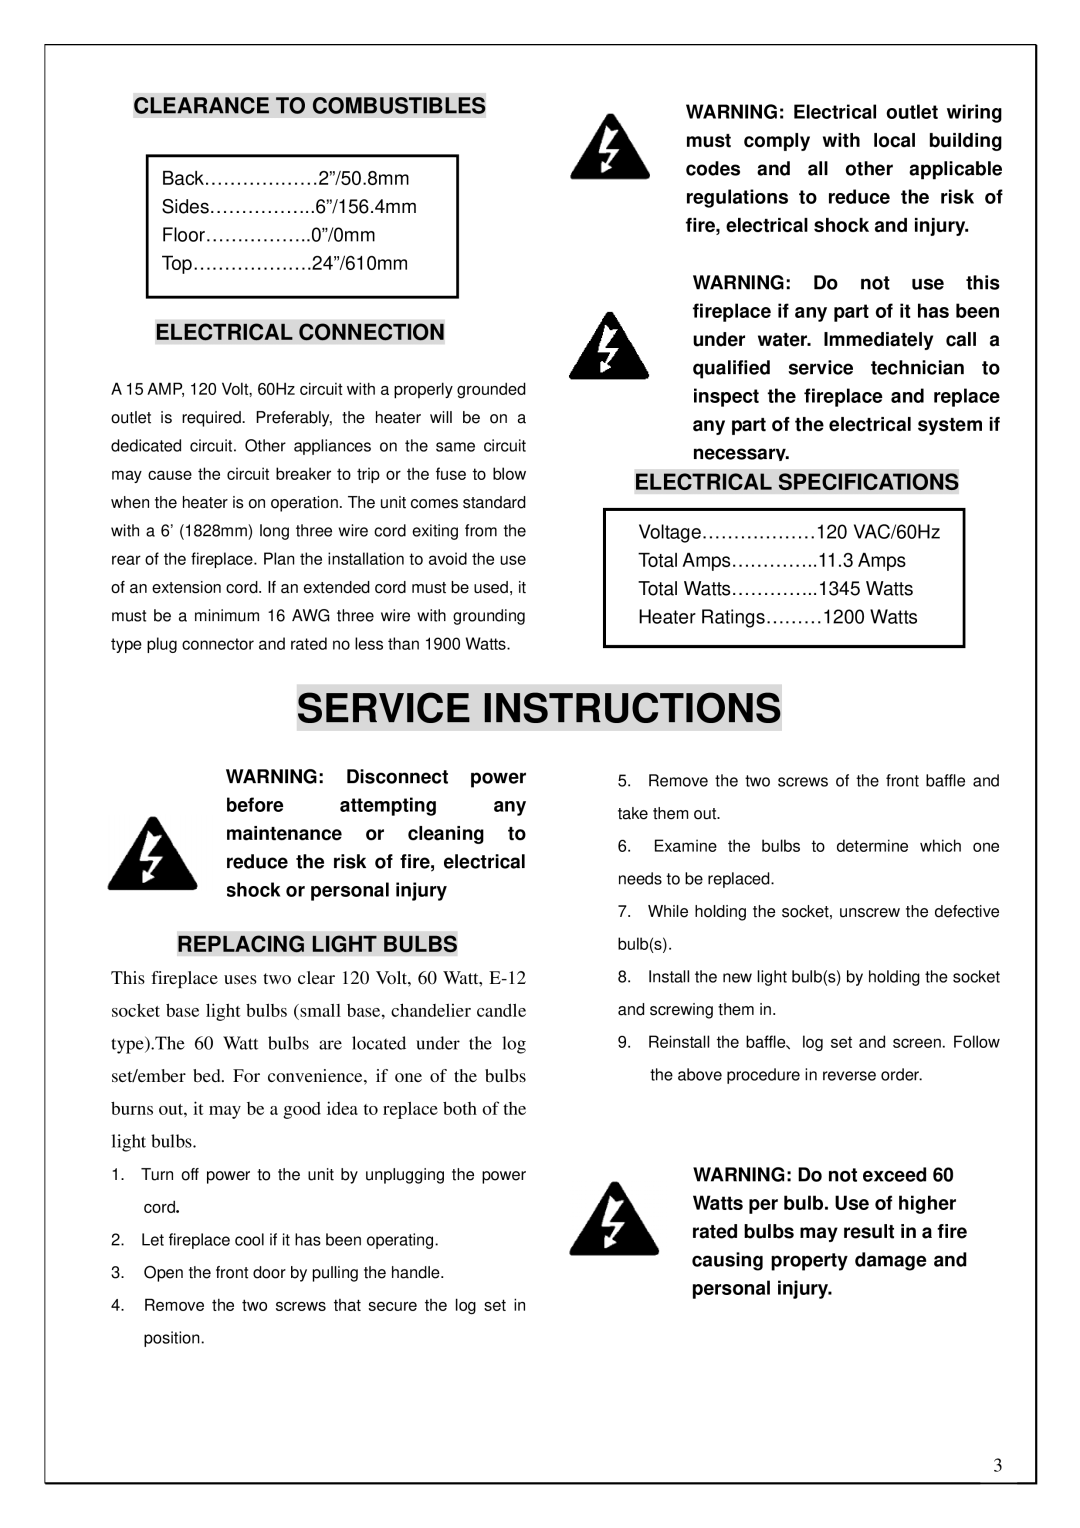 Procom V50HYLC, V50HYLD Service Instructions, Clearance To Combustibles, Electrical Connection, Electrical Specifications 